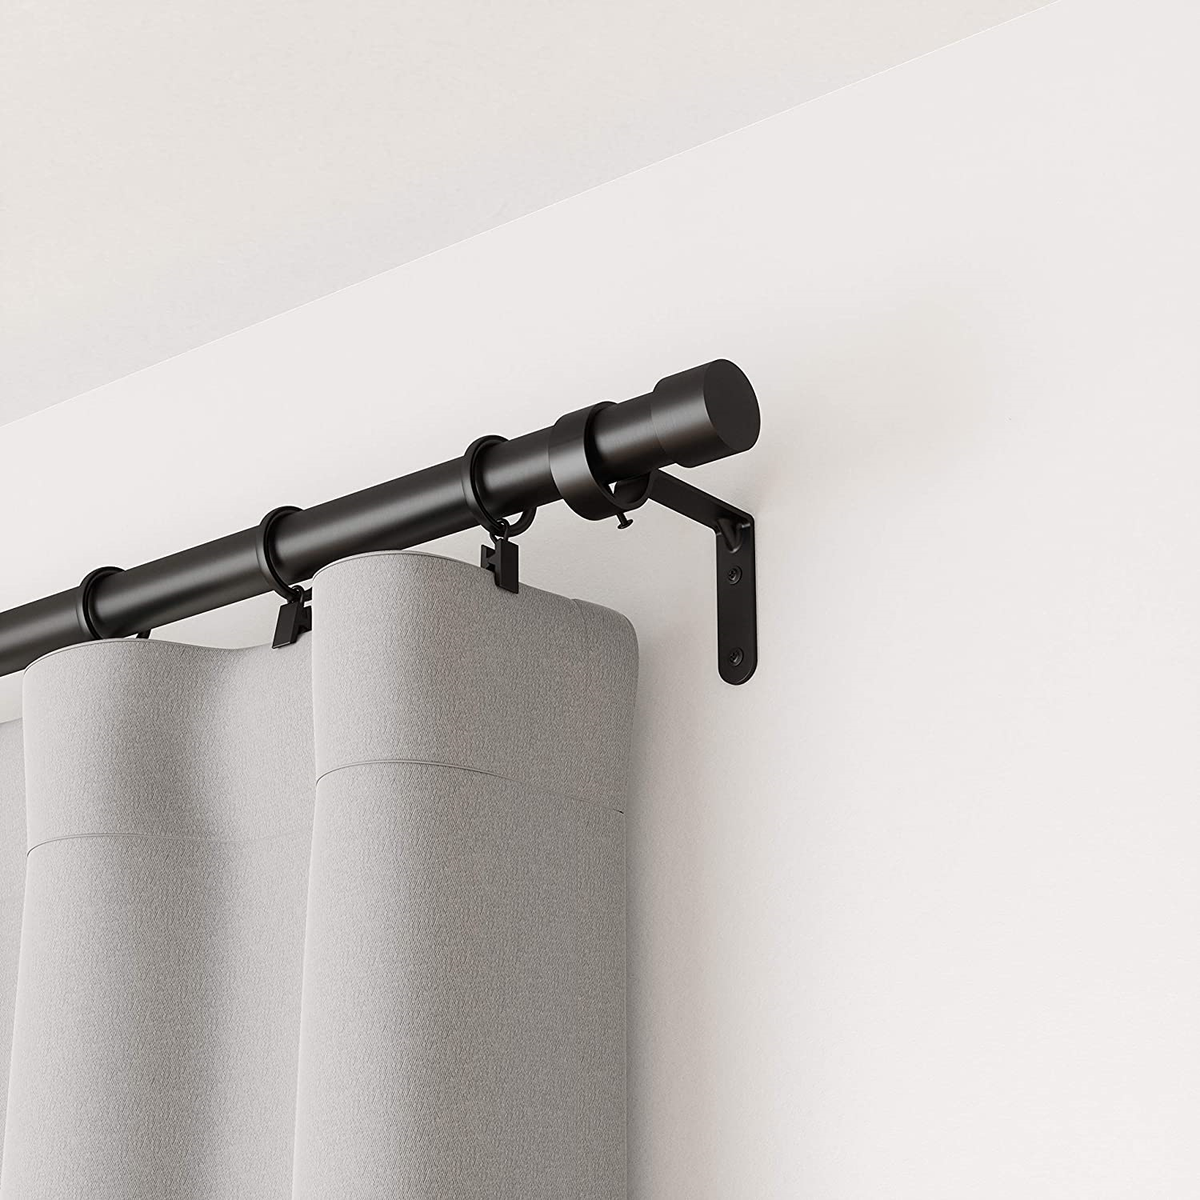 Cappa curtain rods are made of high-quality matte black metal and they support light to medium weight curtains with a max weight of 22lbs.